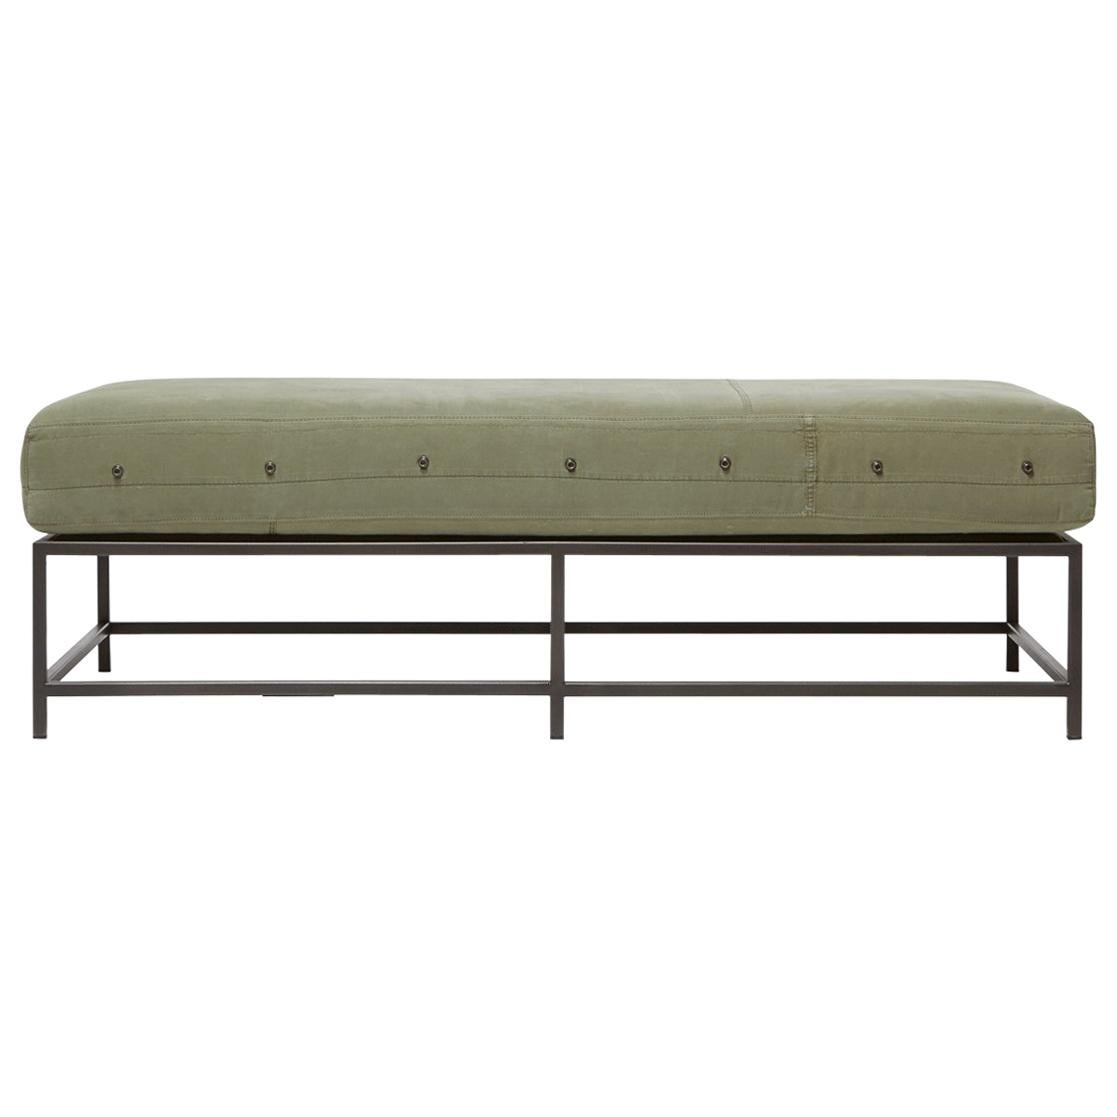 Vintage Military Canvas and Blackened Steel Bench